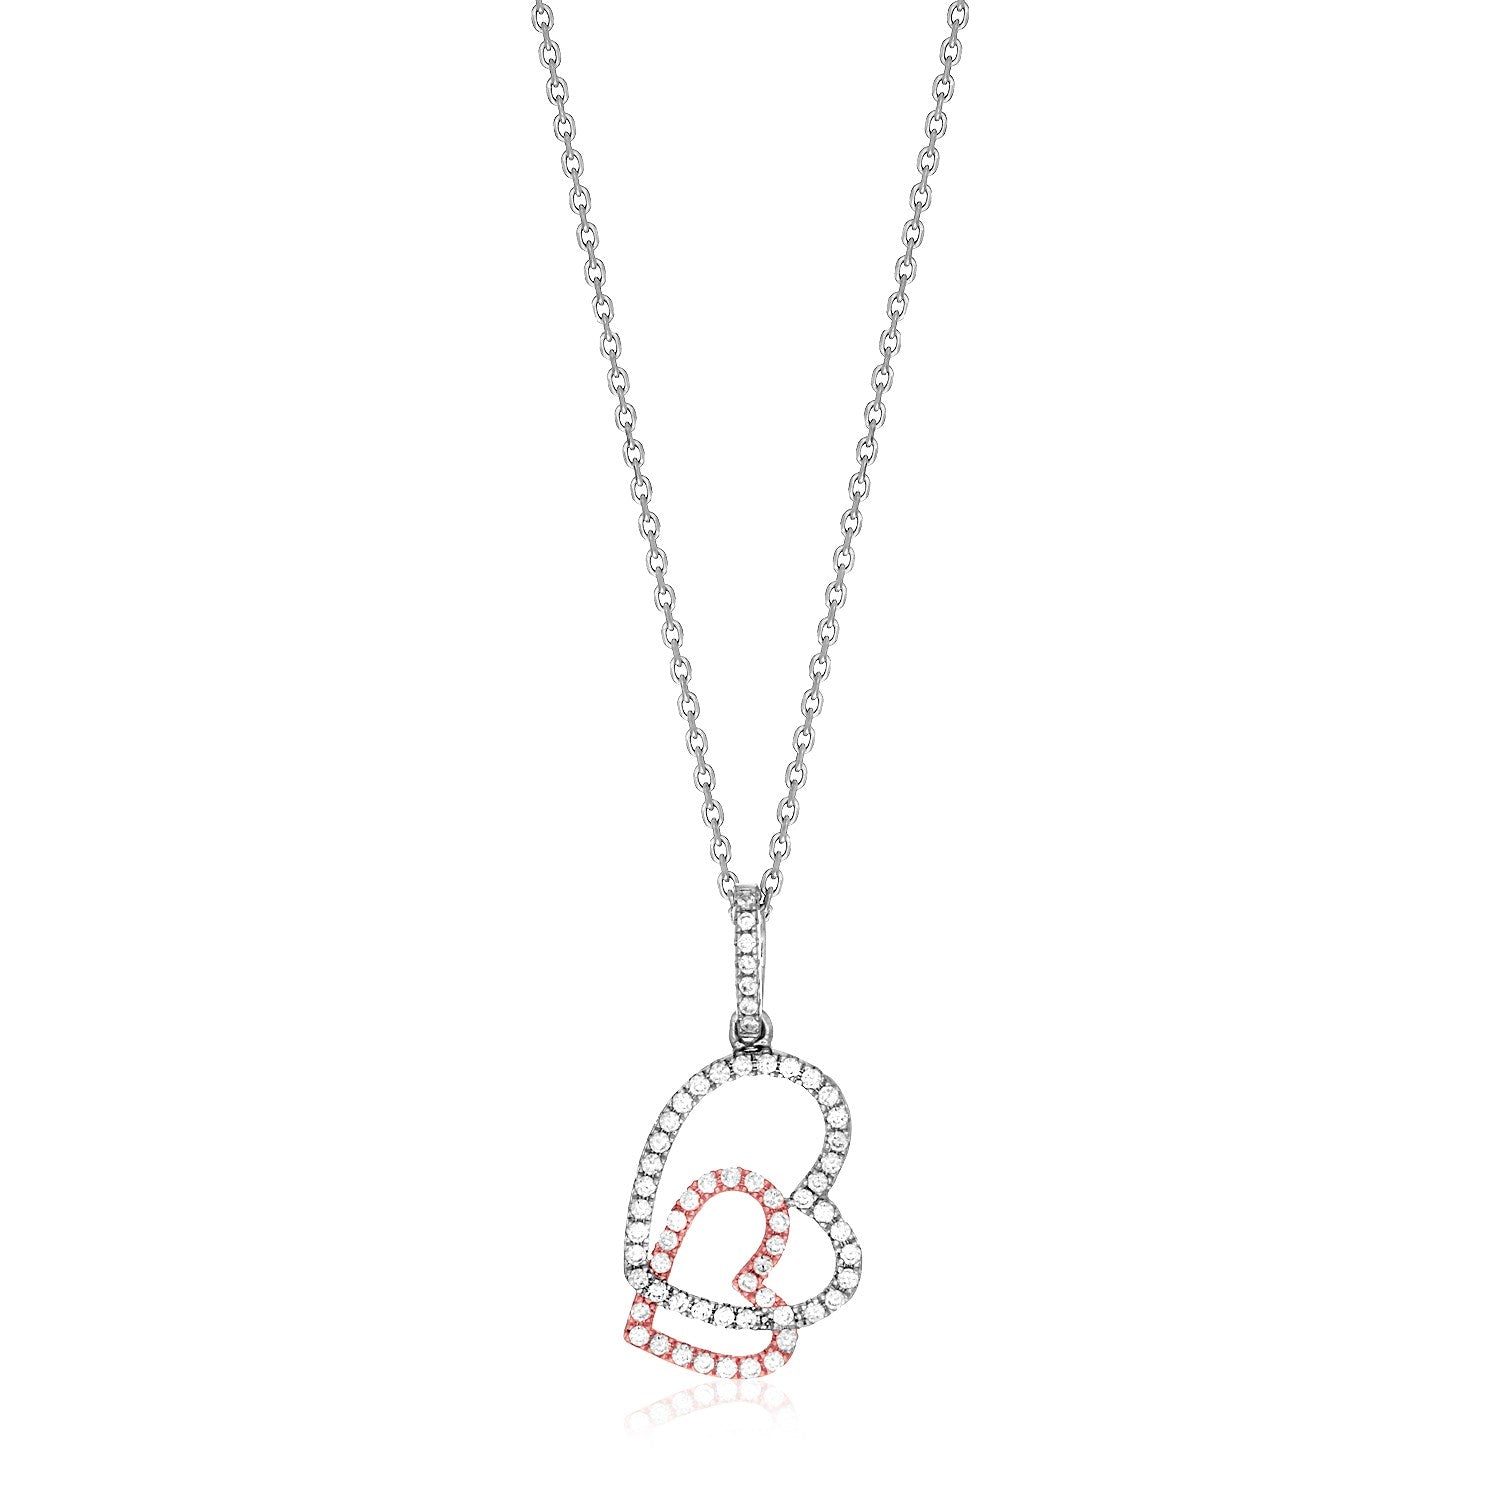 Sterling Silver Two Toned Necklace with Hearts and Cubic Zirconias